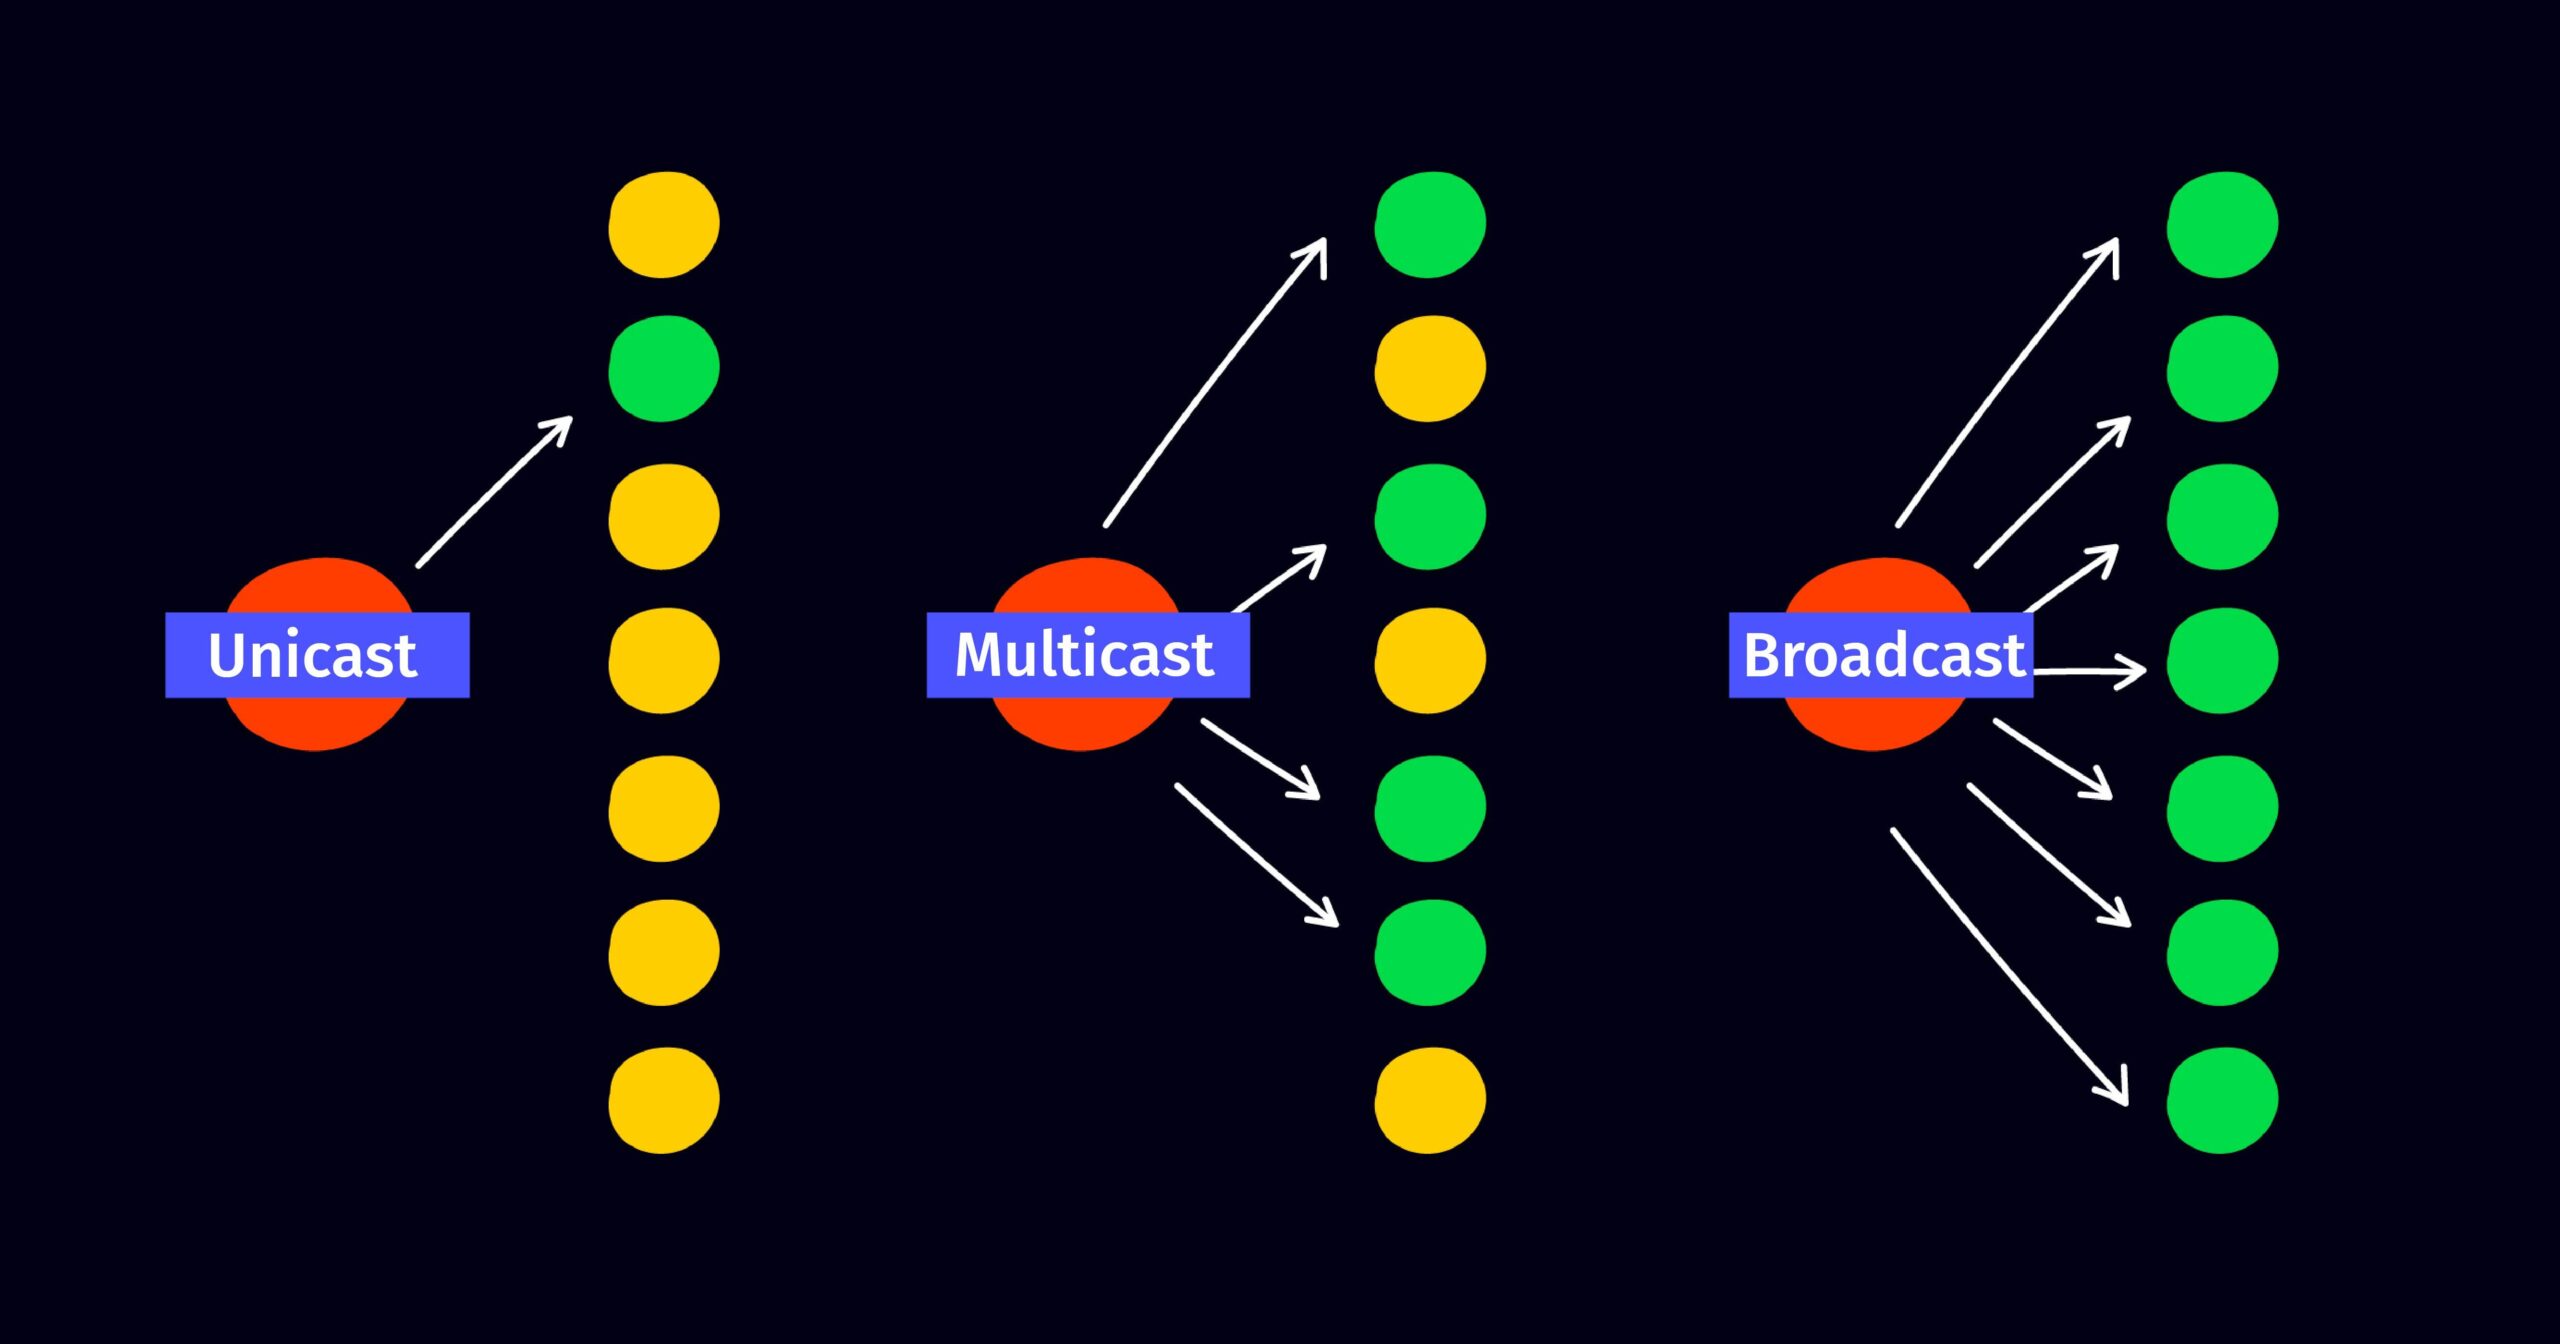 Unicast vs. Multicast vs. Broadcast: What’s the Difference?